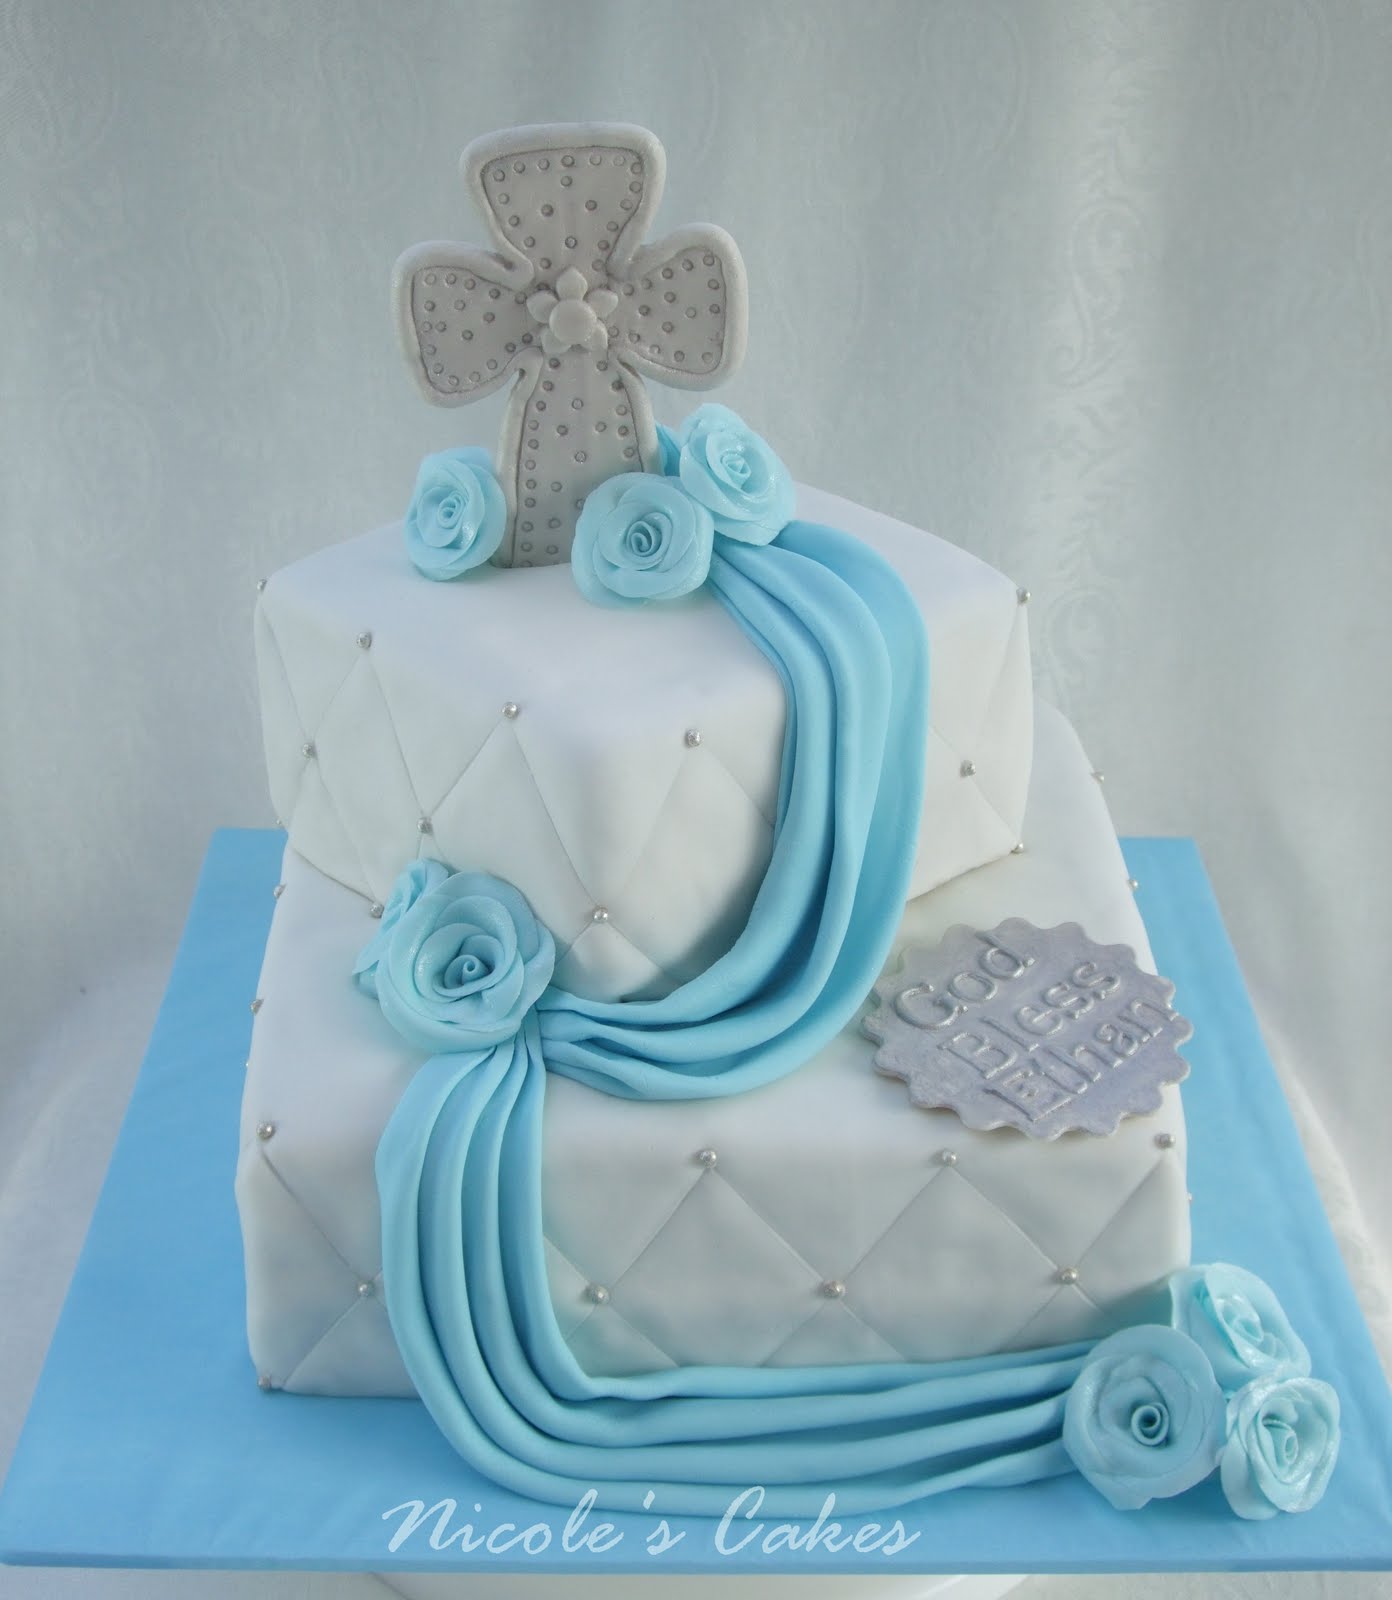 cool cake decorations Confections, Cakes & Creations!